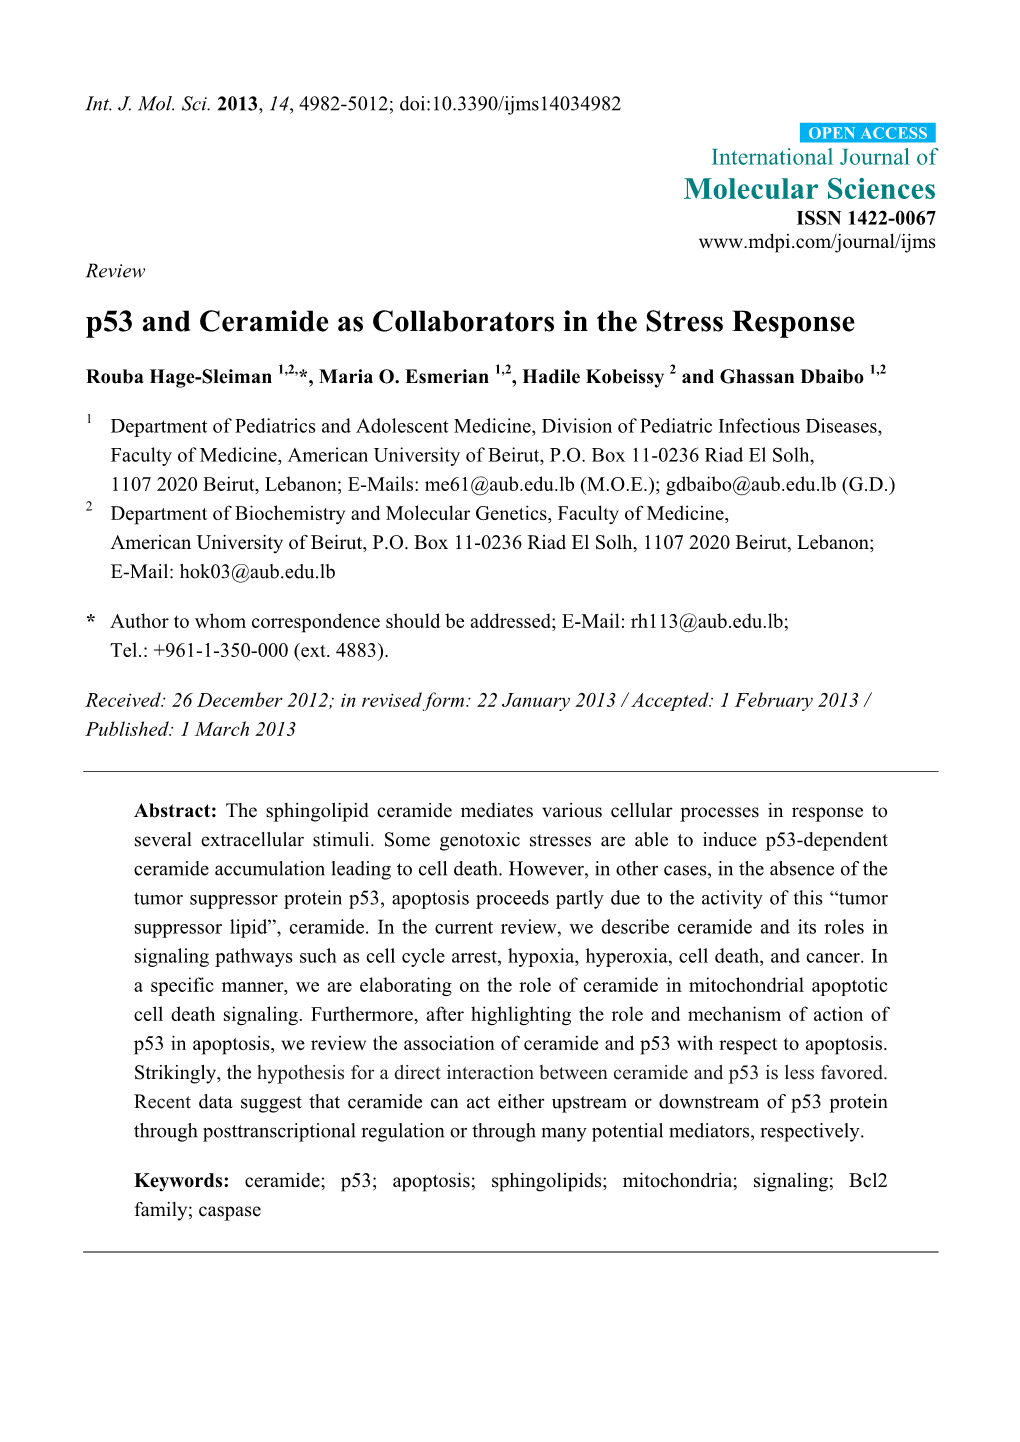 P53 and Ceramide As Collaborators in the Stress Response